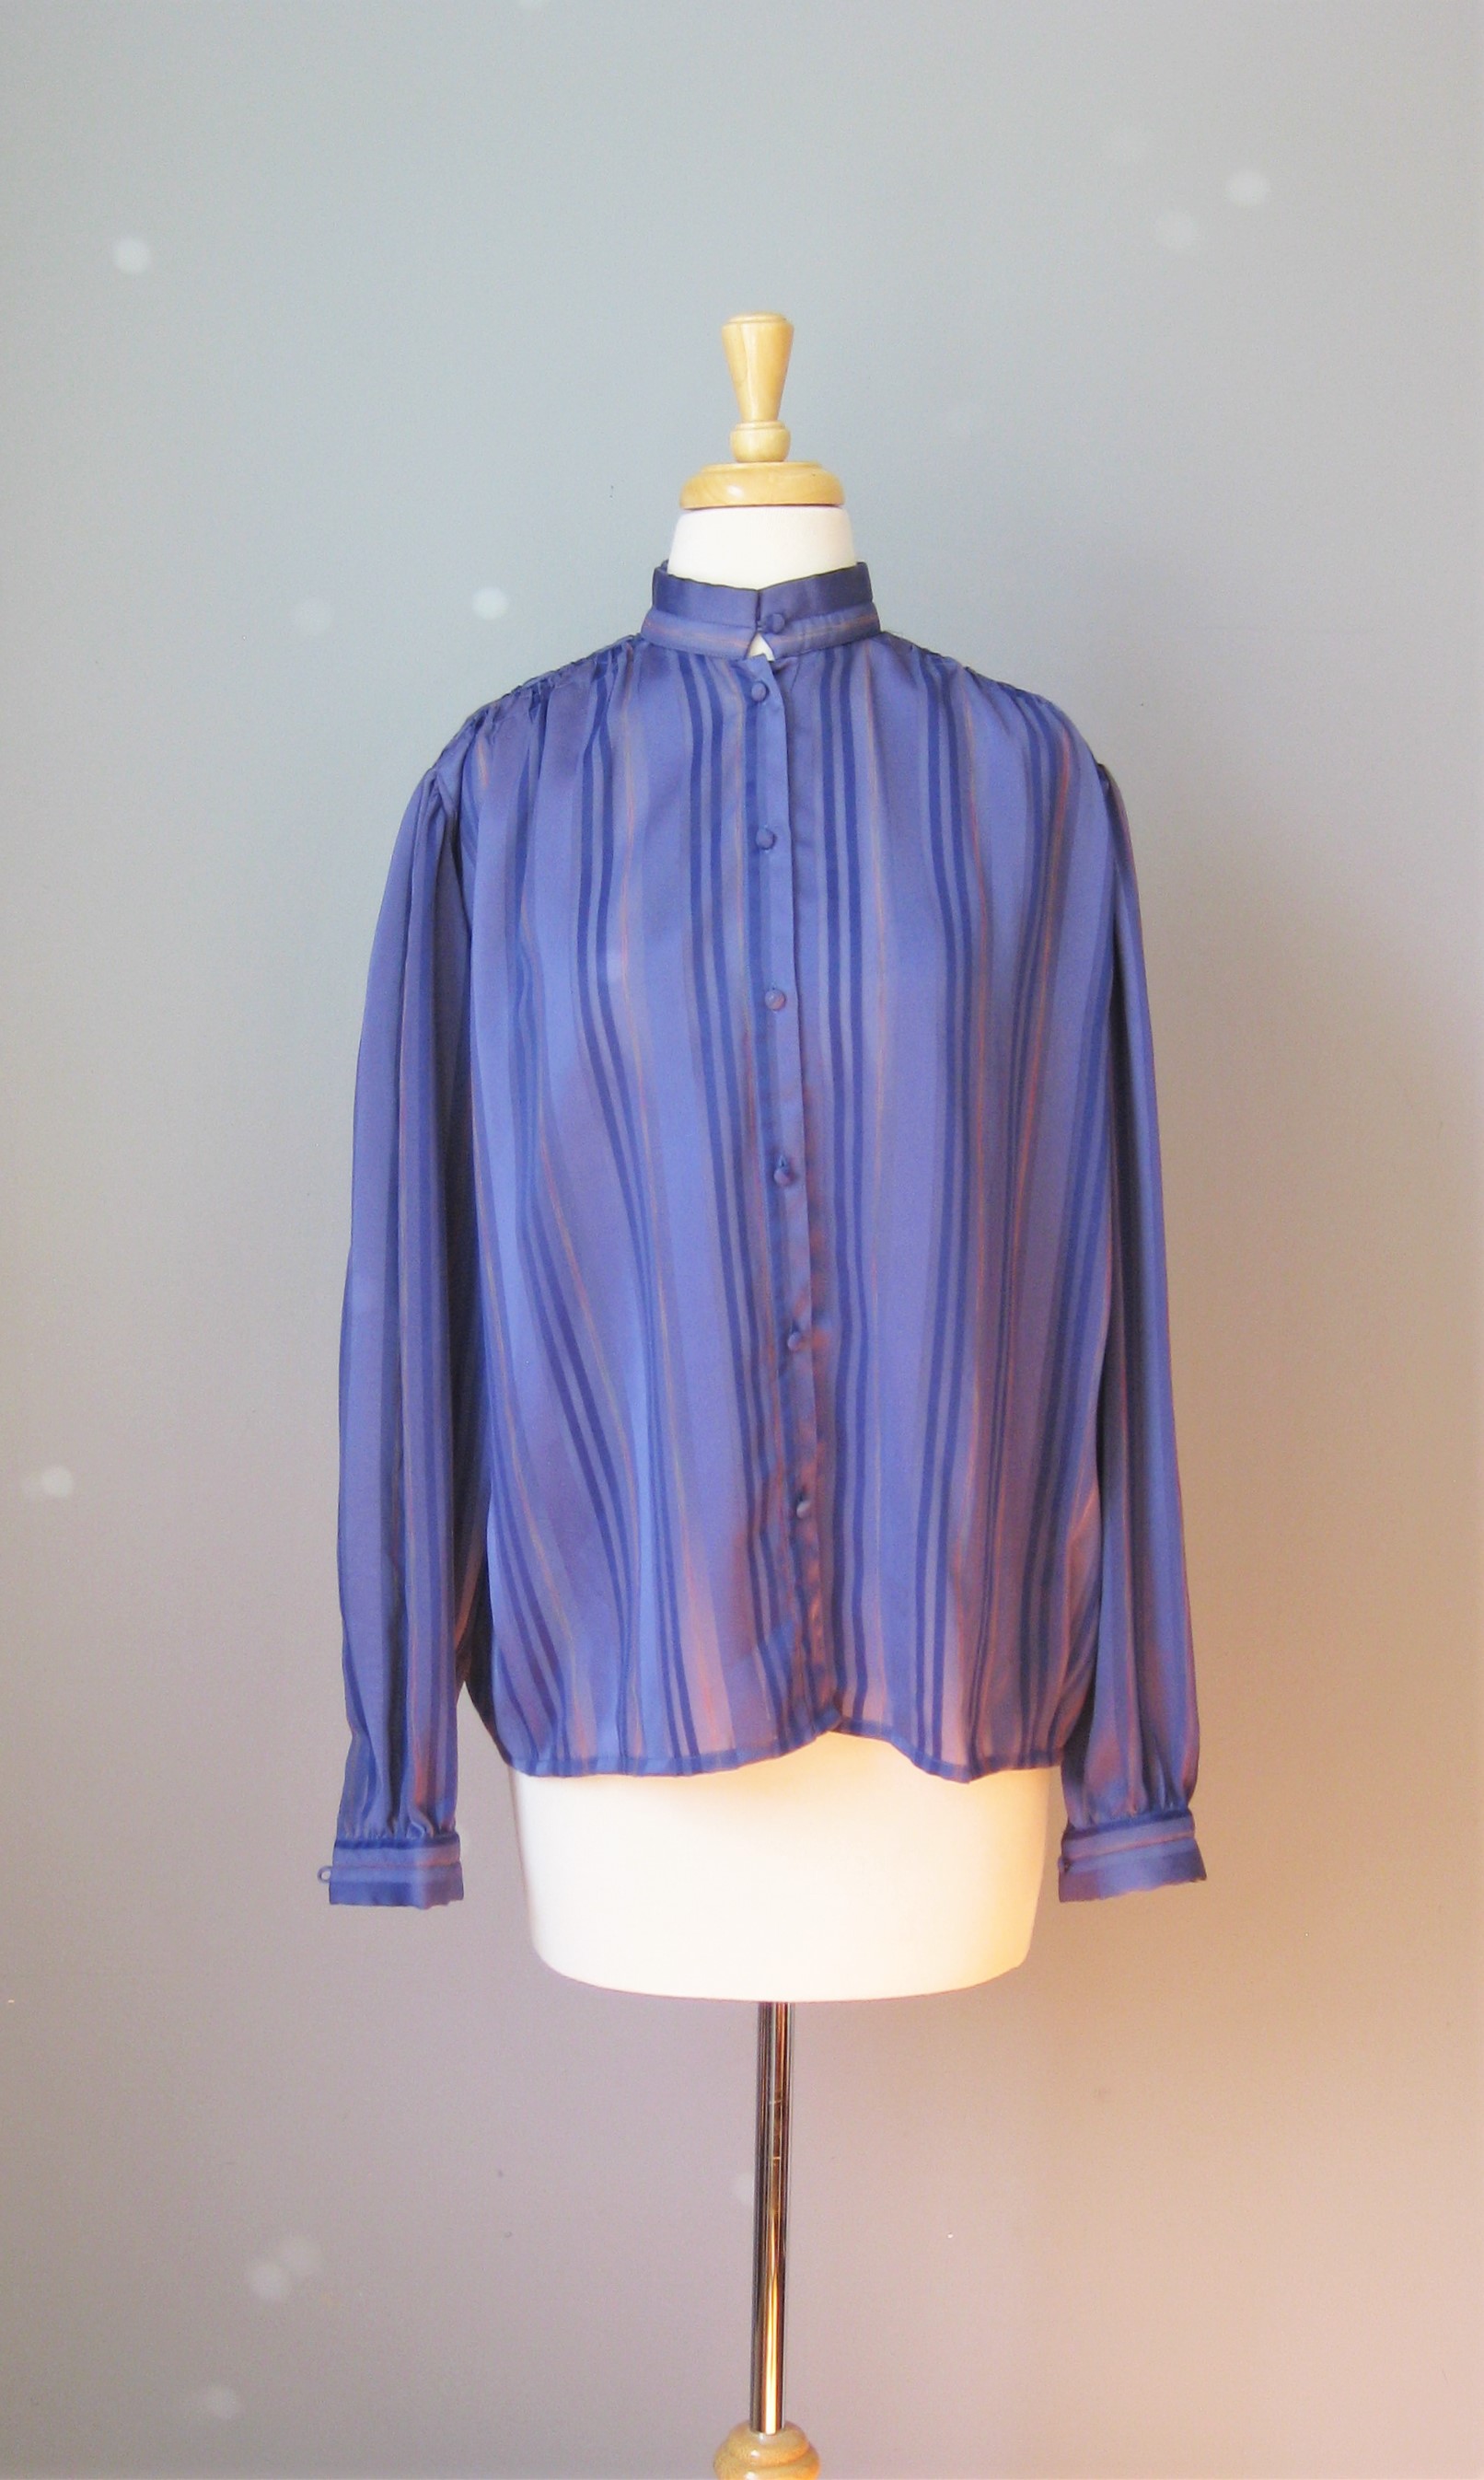 Simple semi sheer blouse in purple
Alternating stripes of purple , pink and sheer sections
High button collar
by Janine

Shoulder to shoulder: 17in
Armpit to Armpit: 24in
Waist: 24in
Length: 26in
Underarm sleeve seam length: 17in

Thanks for looking!

#14536